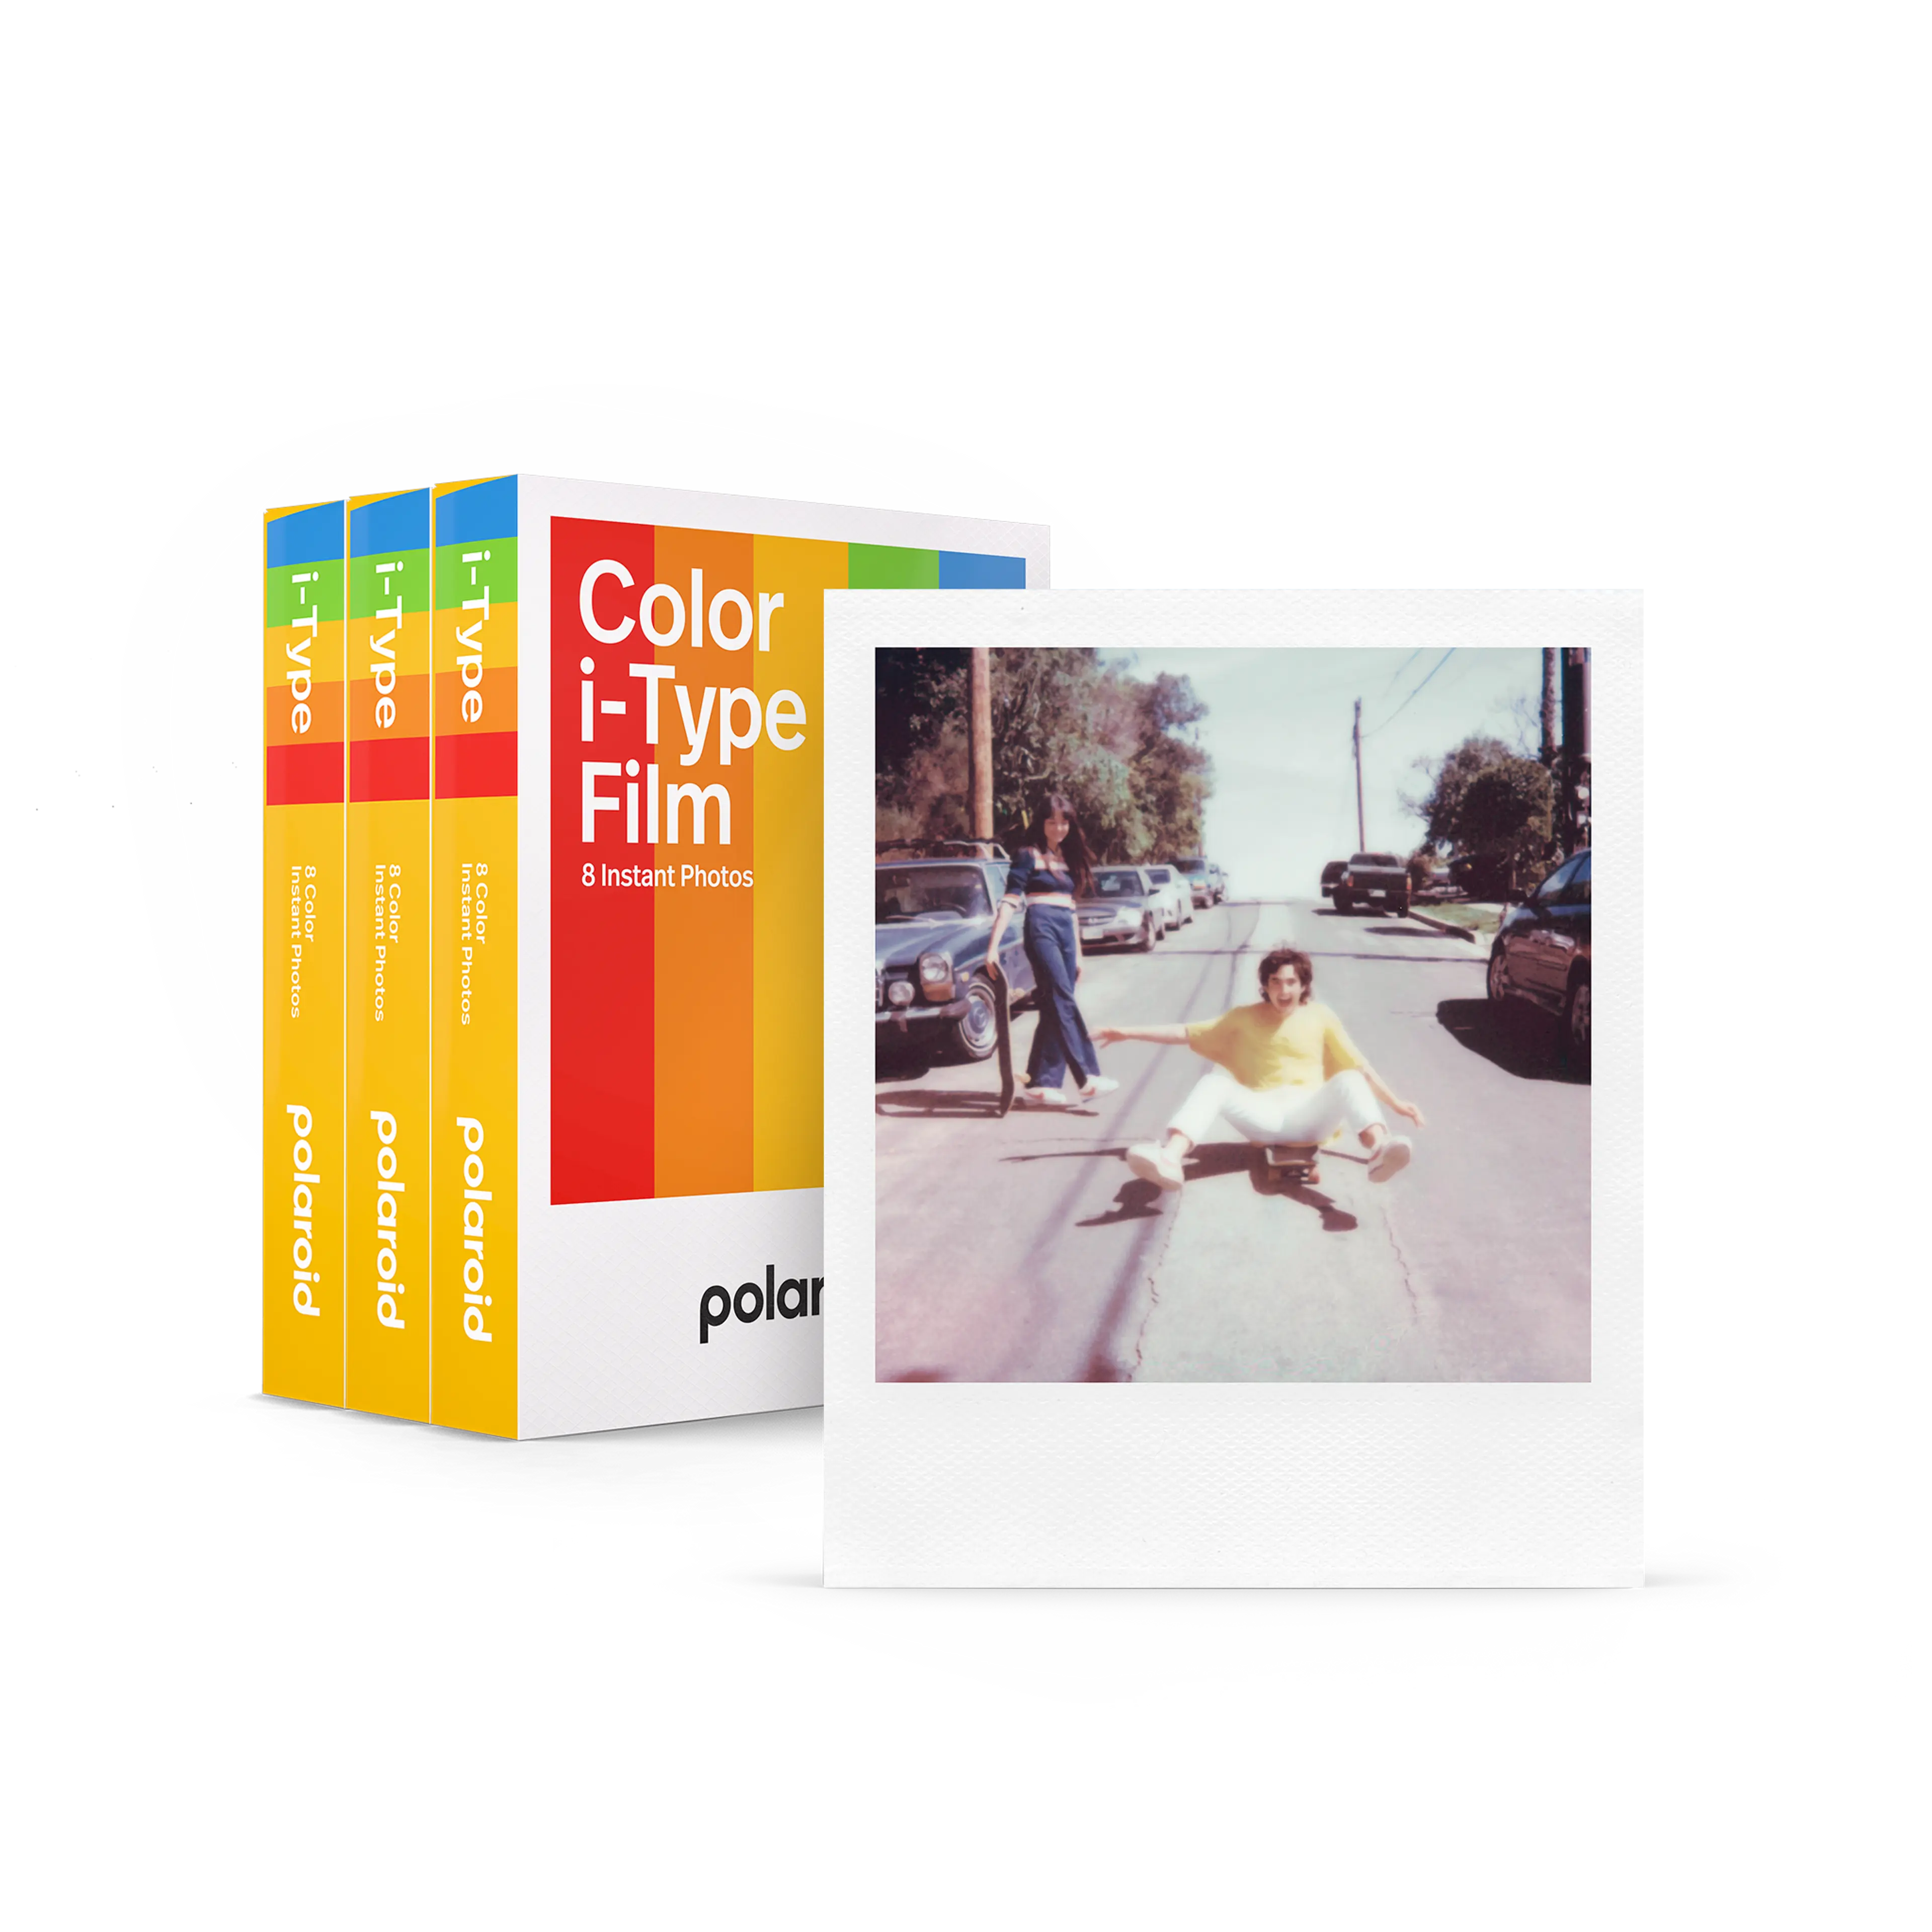 Color Film i-Type Triple pack (24 photos)